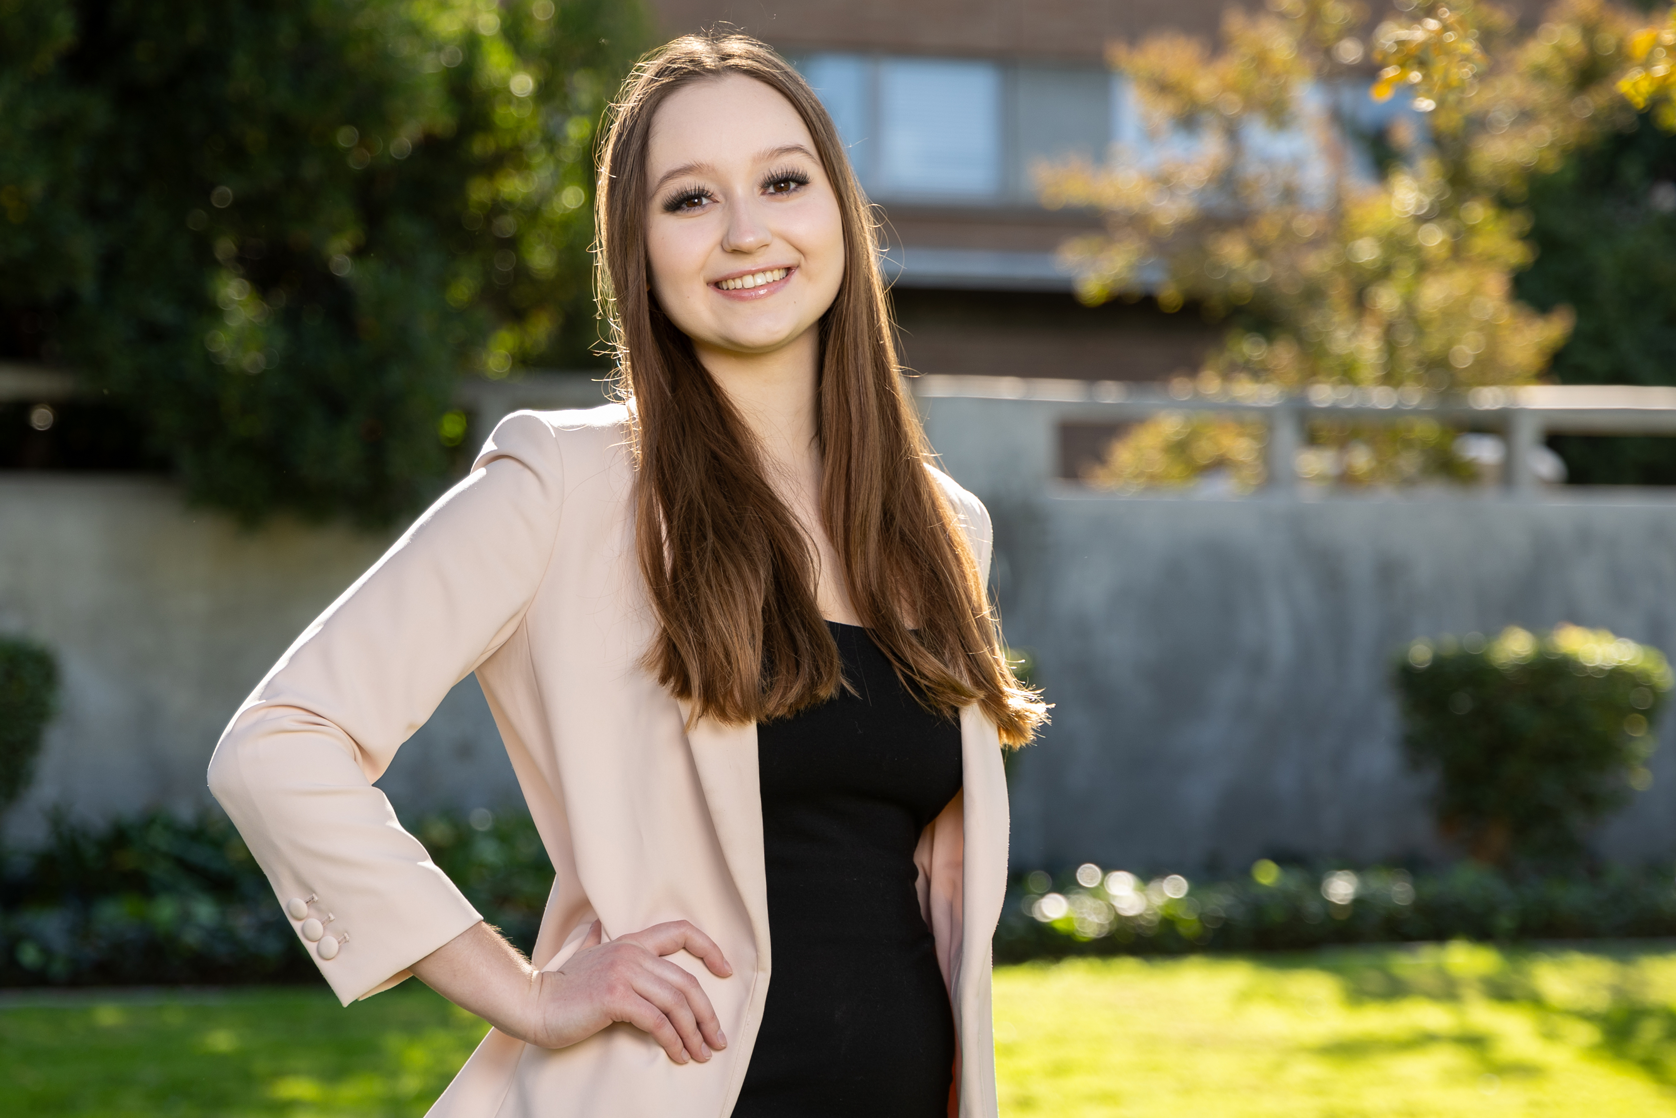 UCR student, Kamilla Minkina, is an art (studio) and art history major, expected to graduate in 2025. She poses on campus by Hinderaker Hall wearing a cream colored blazer and a black dress.